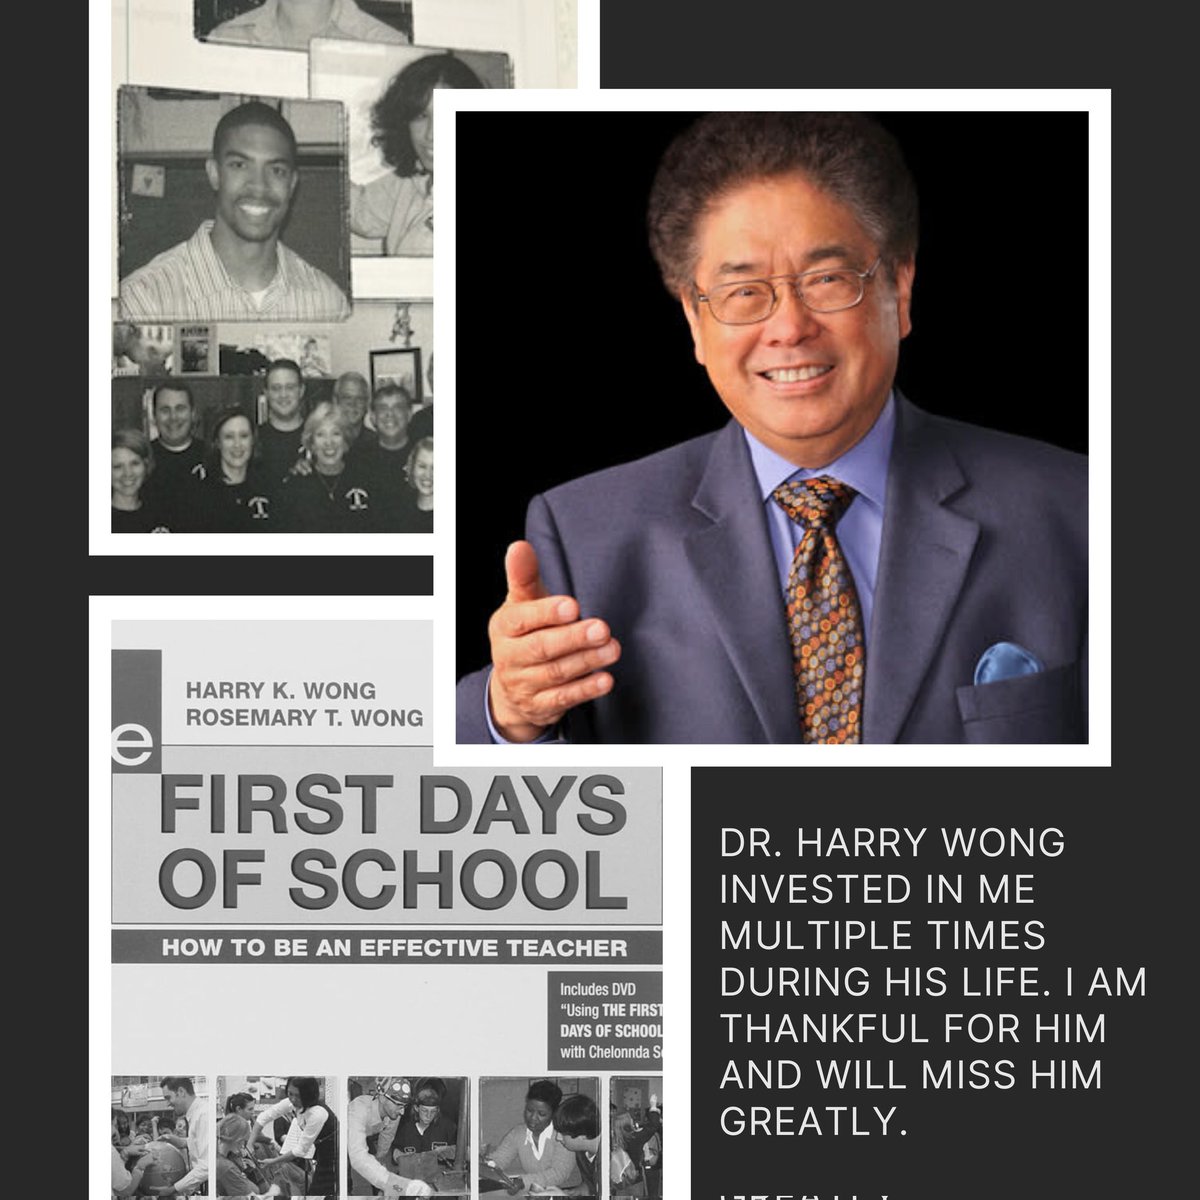 My deepest condolences to the Wong family. Dr. Harry Wong put me in his best selling education book 'The First Days of School' & years later offered me advice on the contents of my own book. He was passionate about helping teachers be effective for students.